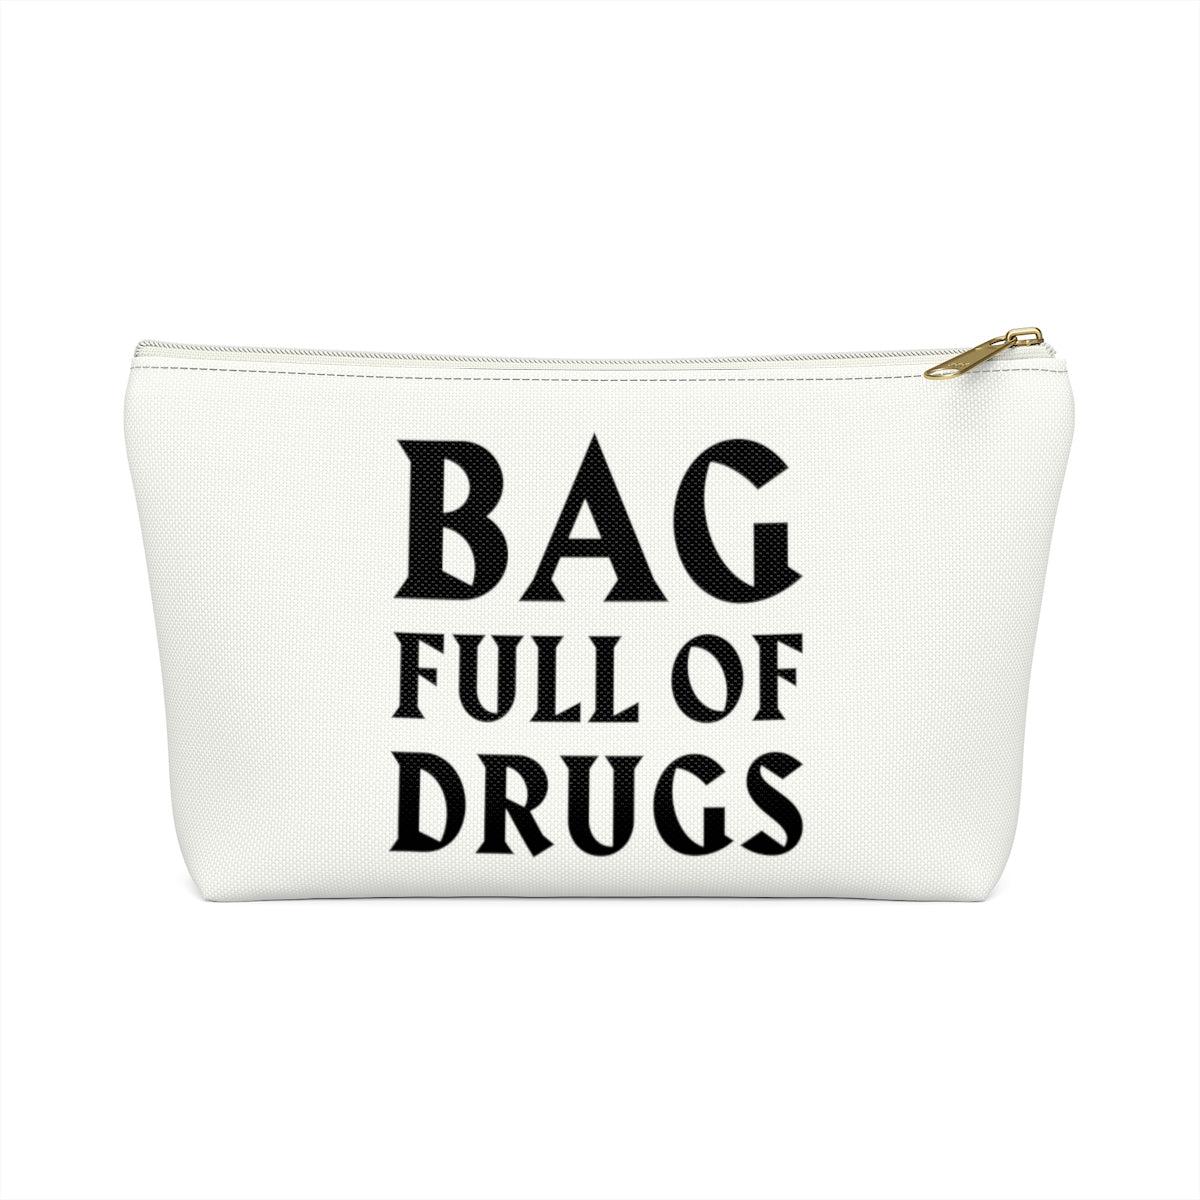 Diabetes and Medicine Bags - Funny and Fashionable Travel Pouches ...